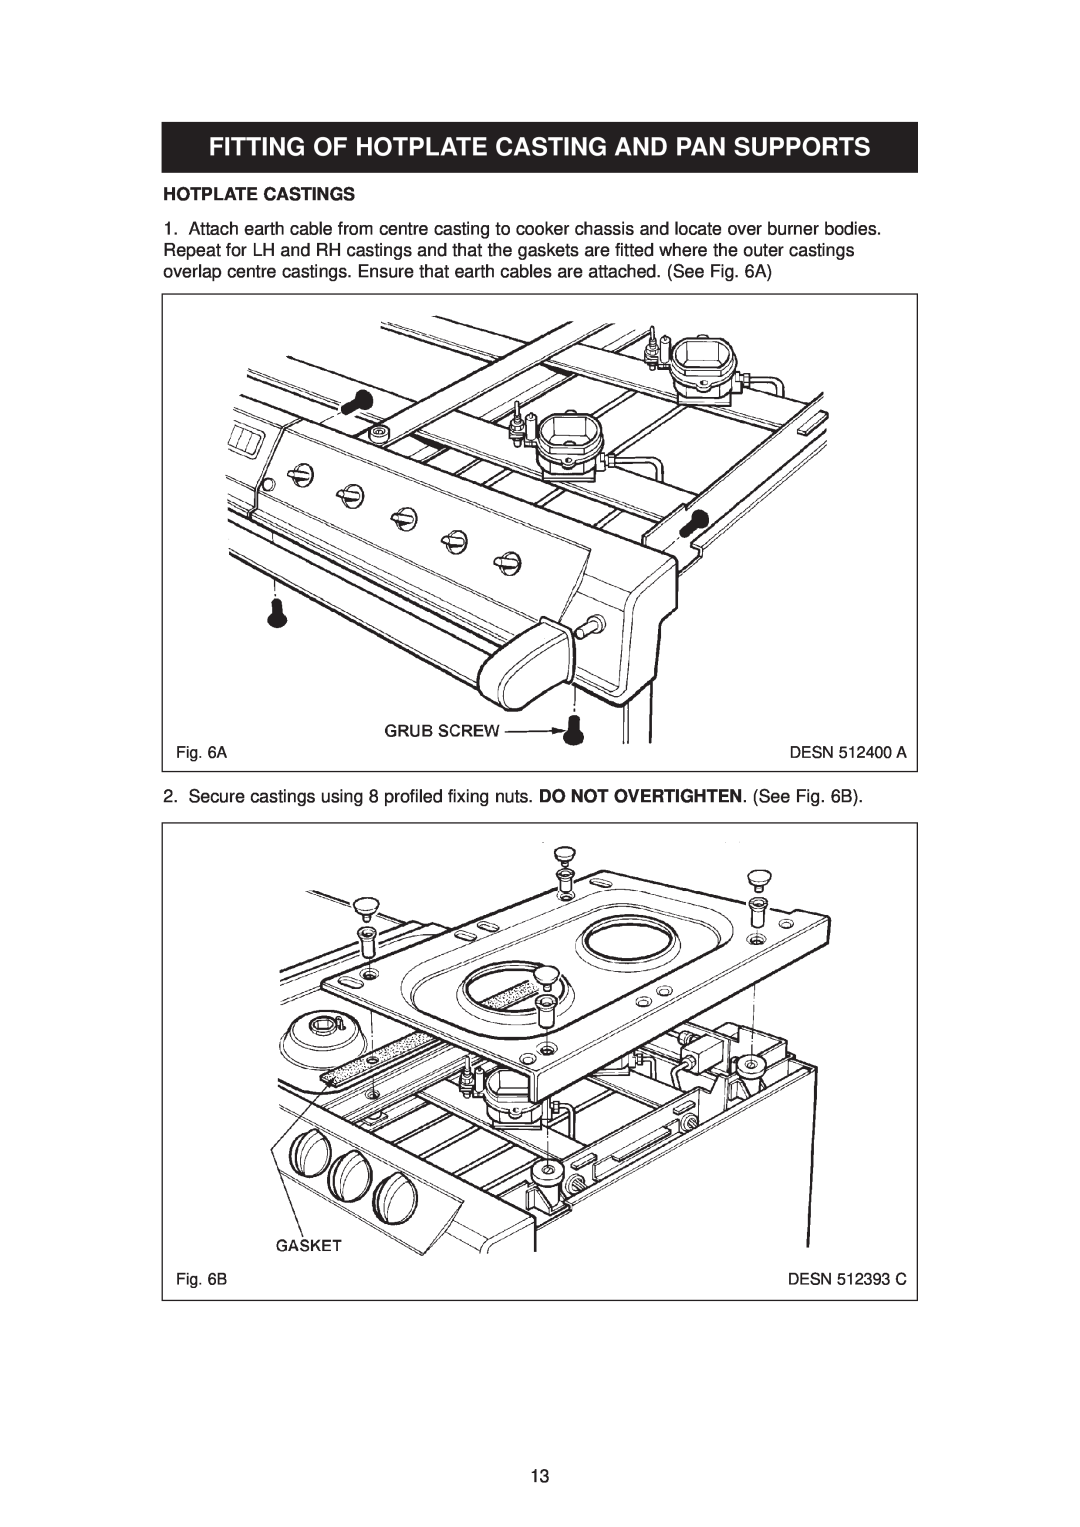 Aga Ranges dc6 owner manual Fitting Of Hotplate Casting And Pan Supports, Hotplate Castings 